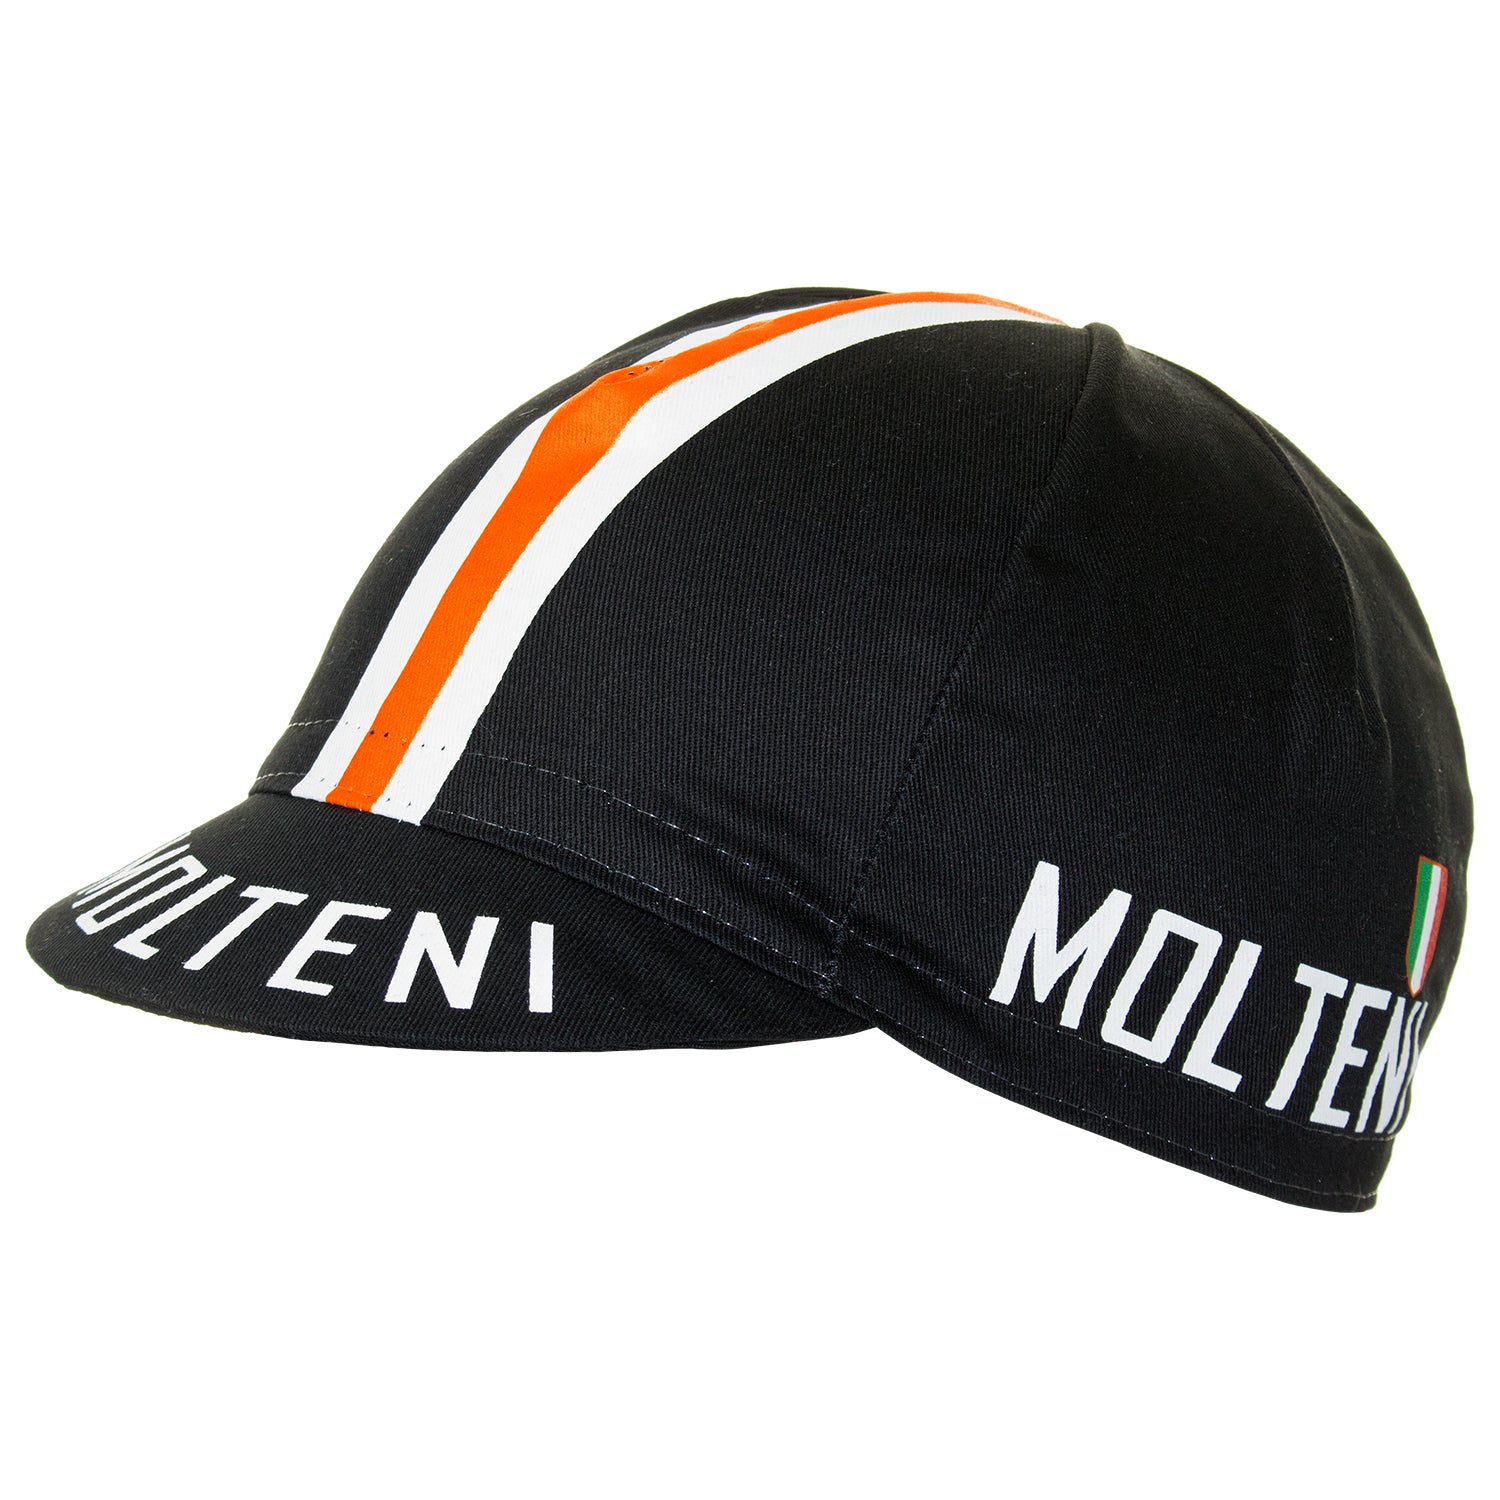 best cycling caps 2018